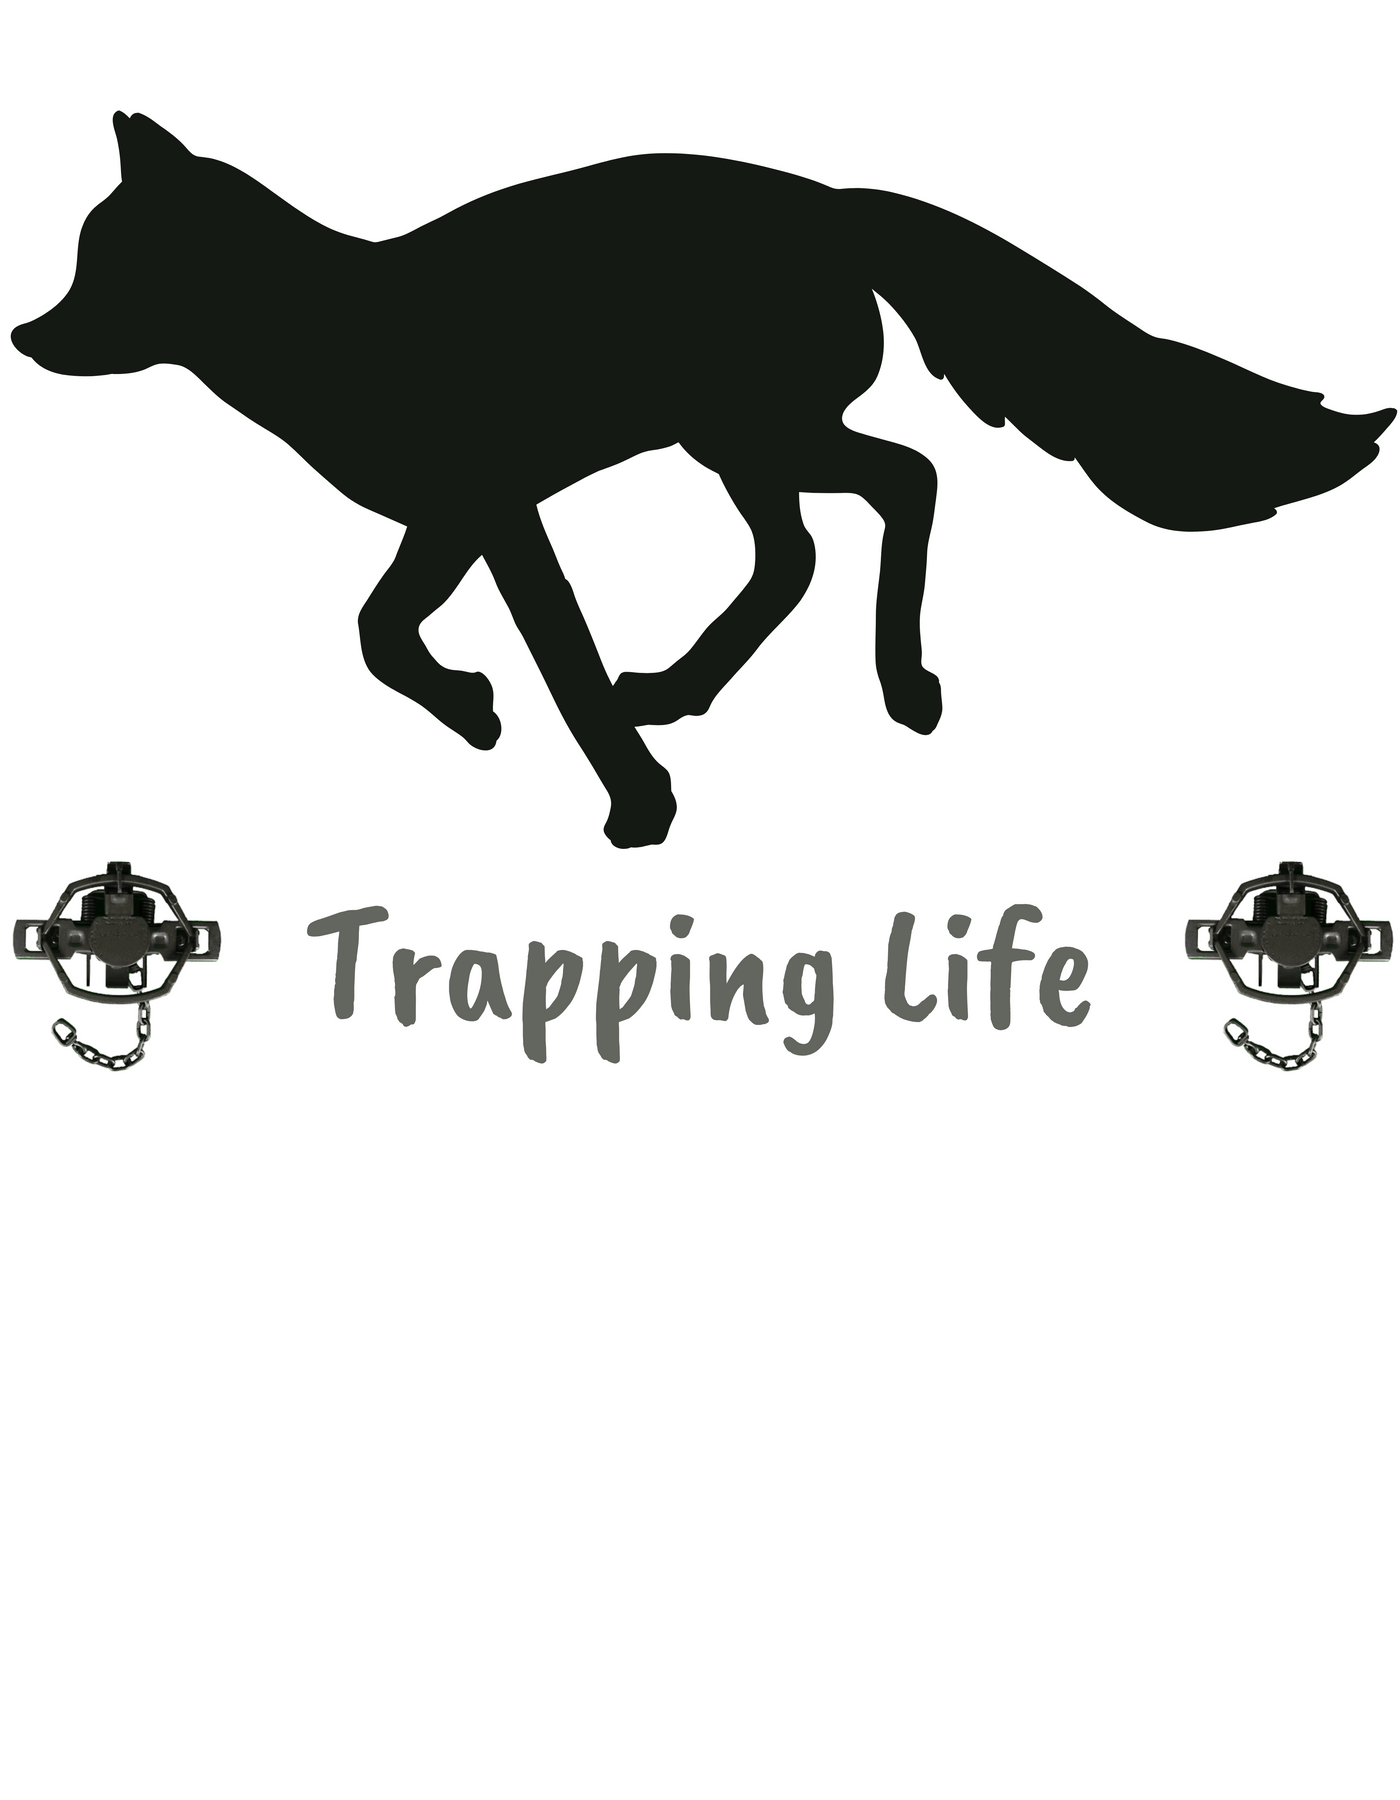 Trapping Life Unisex Tee